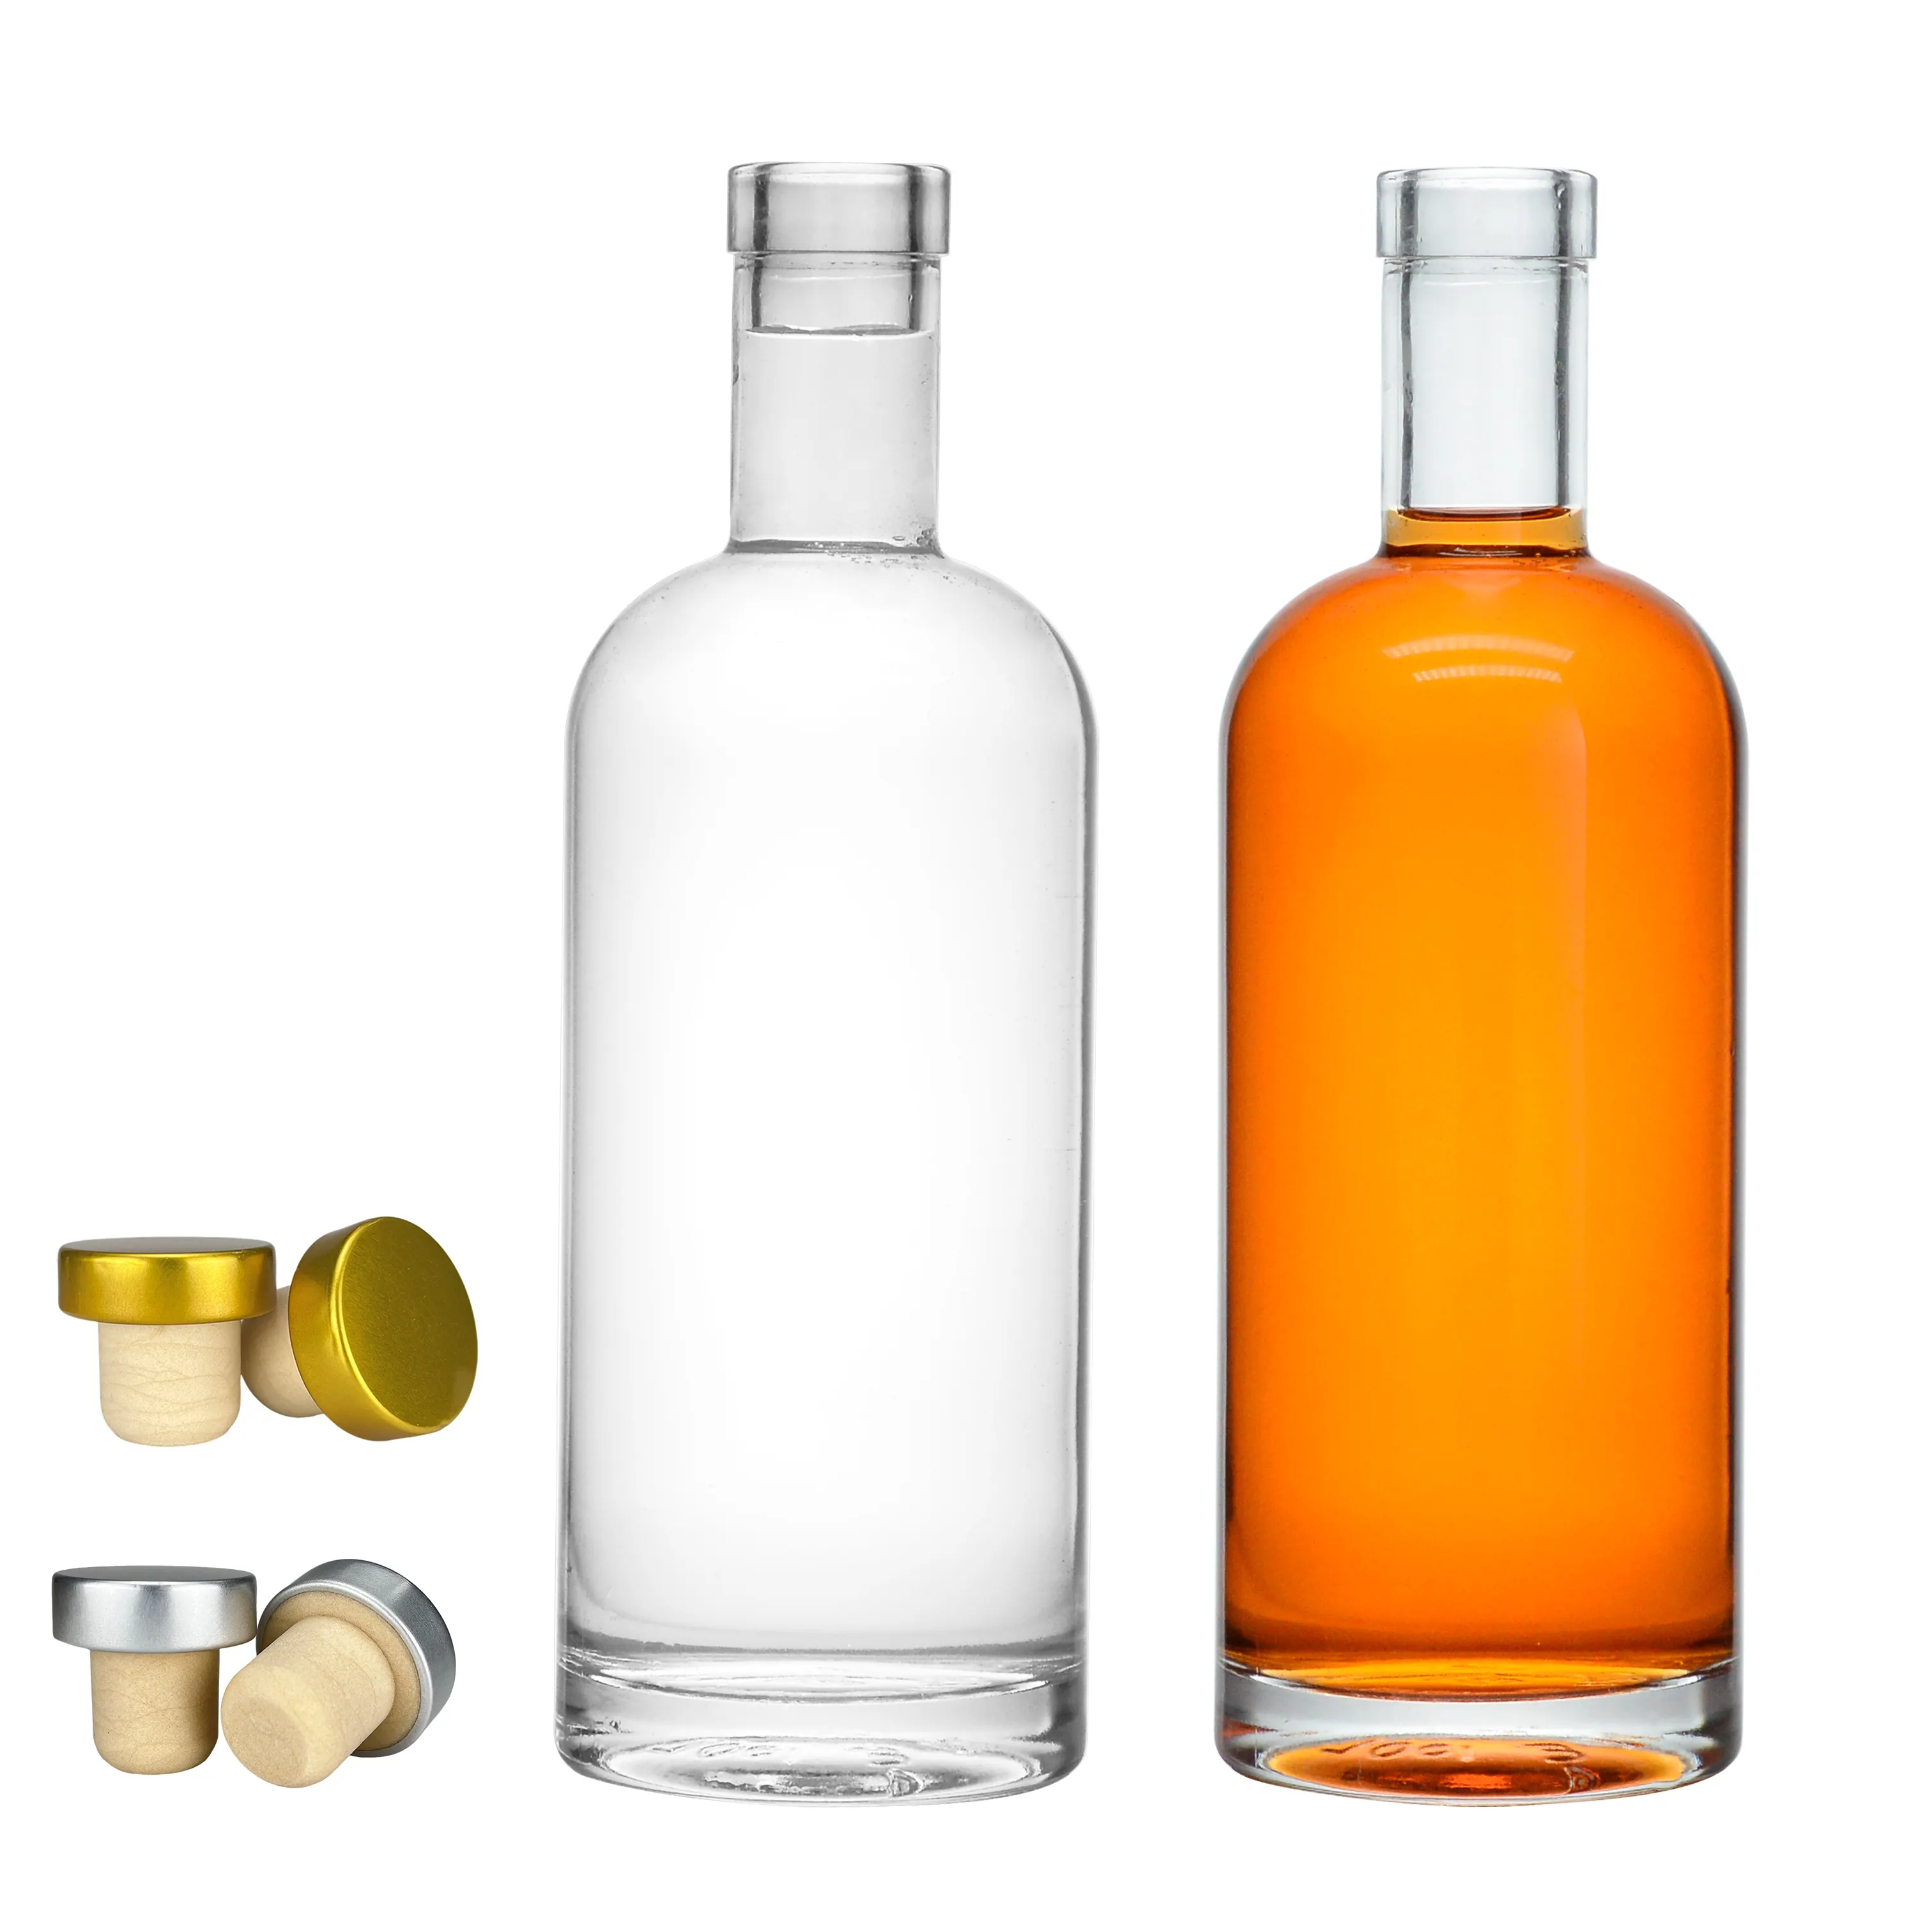 New Design Price Square Glass Bottles Swing Top Glass Bottles Glass Wine Bottle For Vodka Whiskey Rum Gin Tequila Liquor Contain